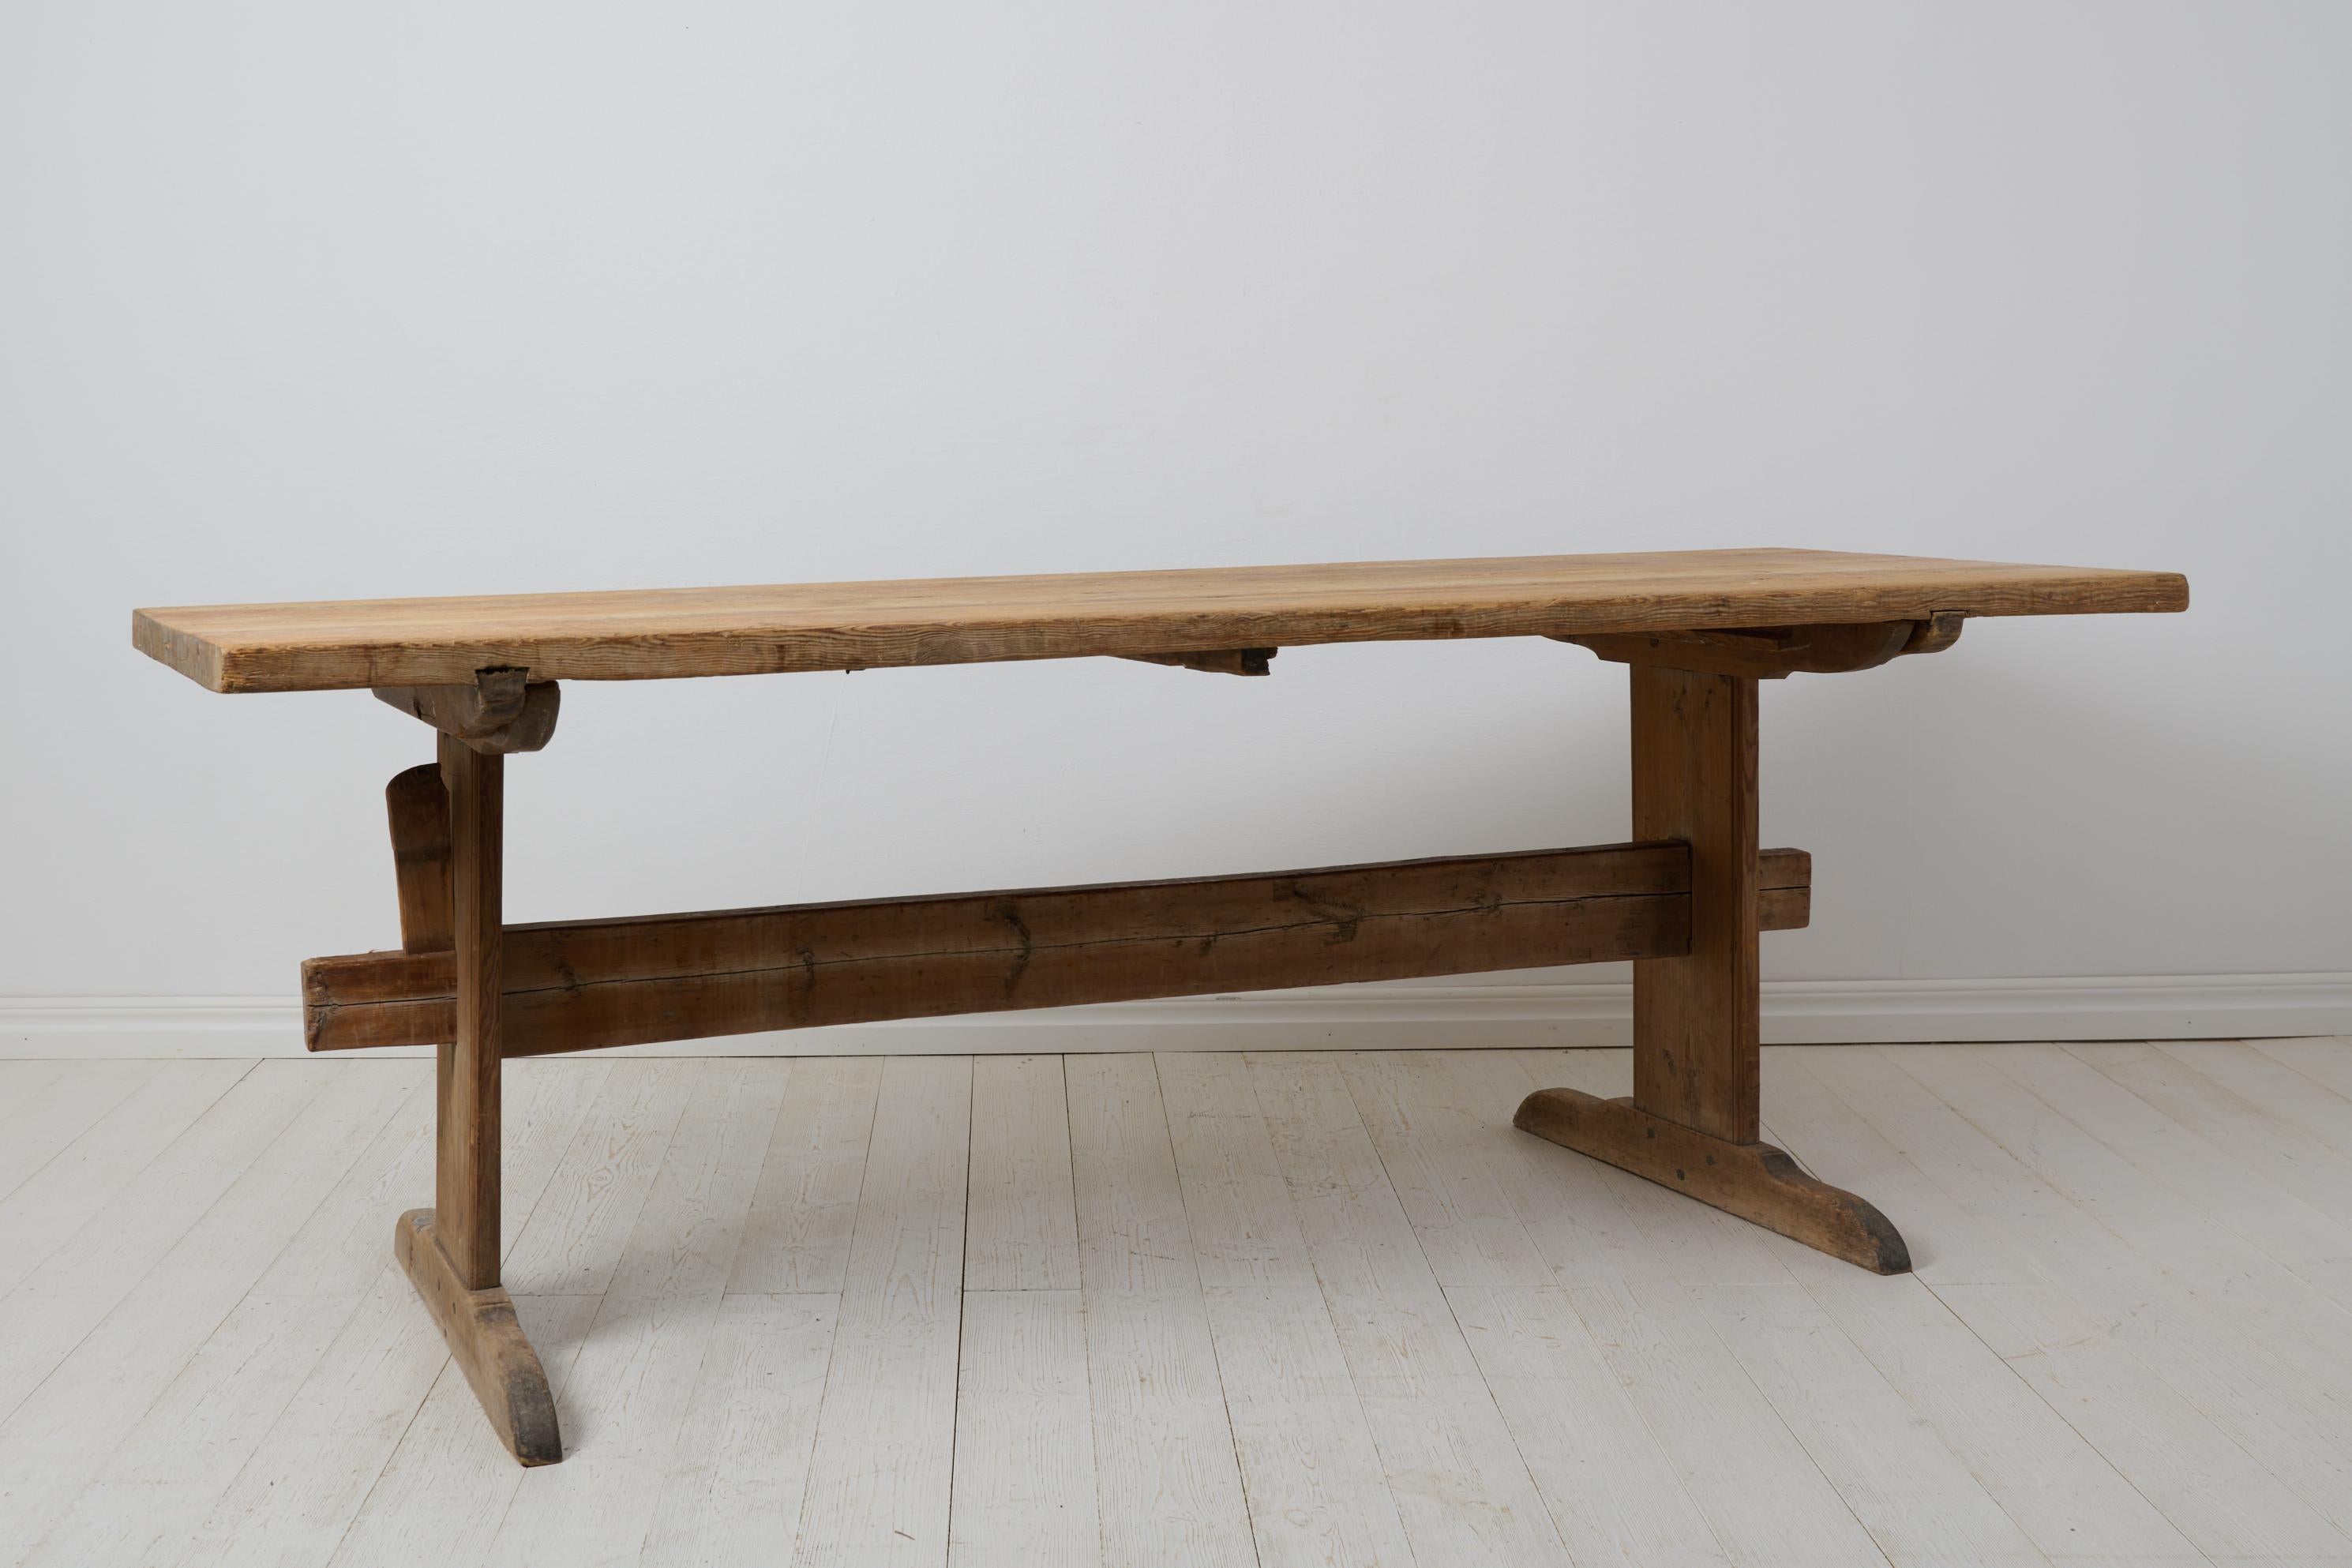 Large trestle dining table from northern Sweden. The table is a genuine antique made by hand in pine around 1820 to 1840. The table top is solid wood made of only two boards. The wood has never been painted and has a genuine patina after 200 years